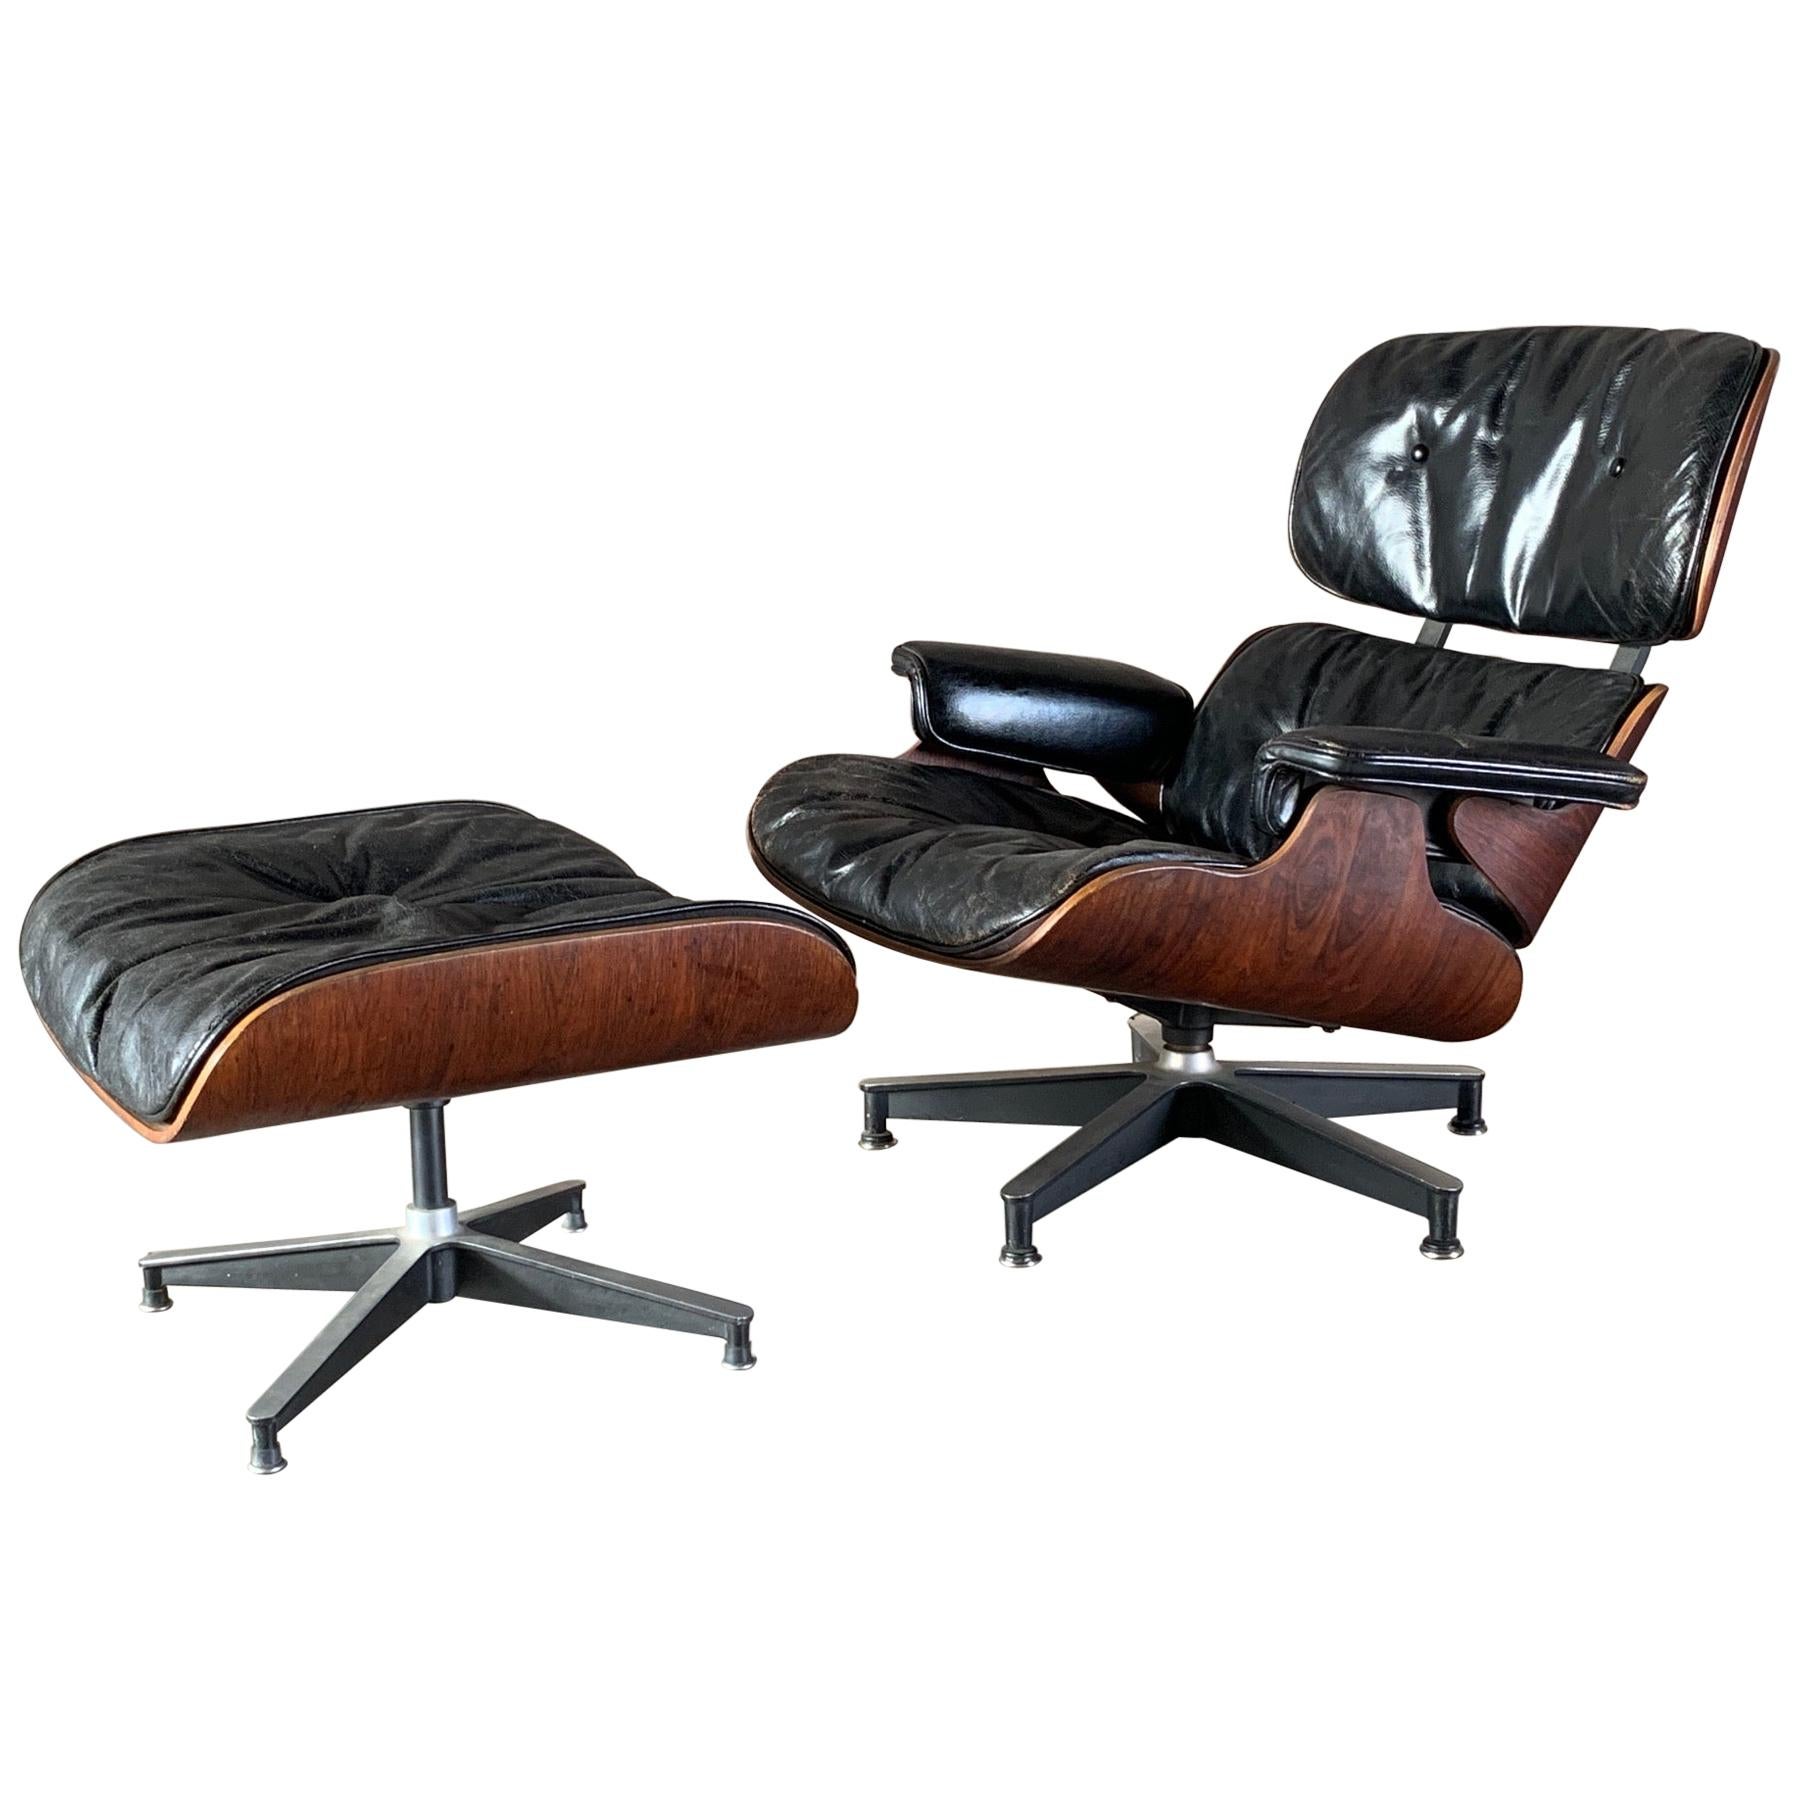 Charles Eames Herman Miller Lounge Chair And Ottoman 1956 At 1stdibs